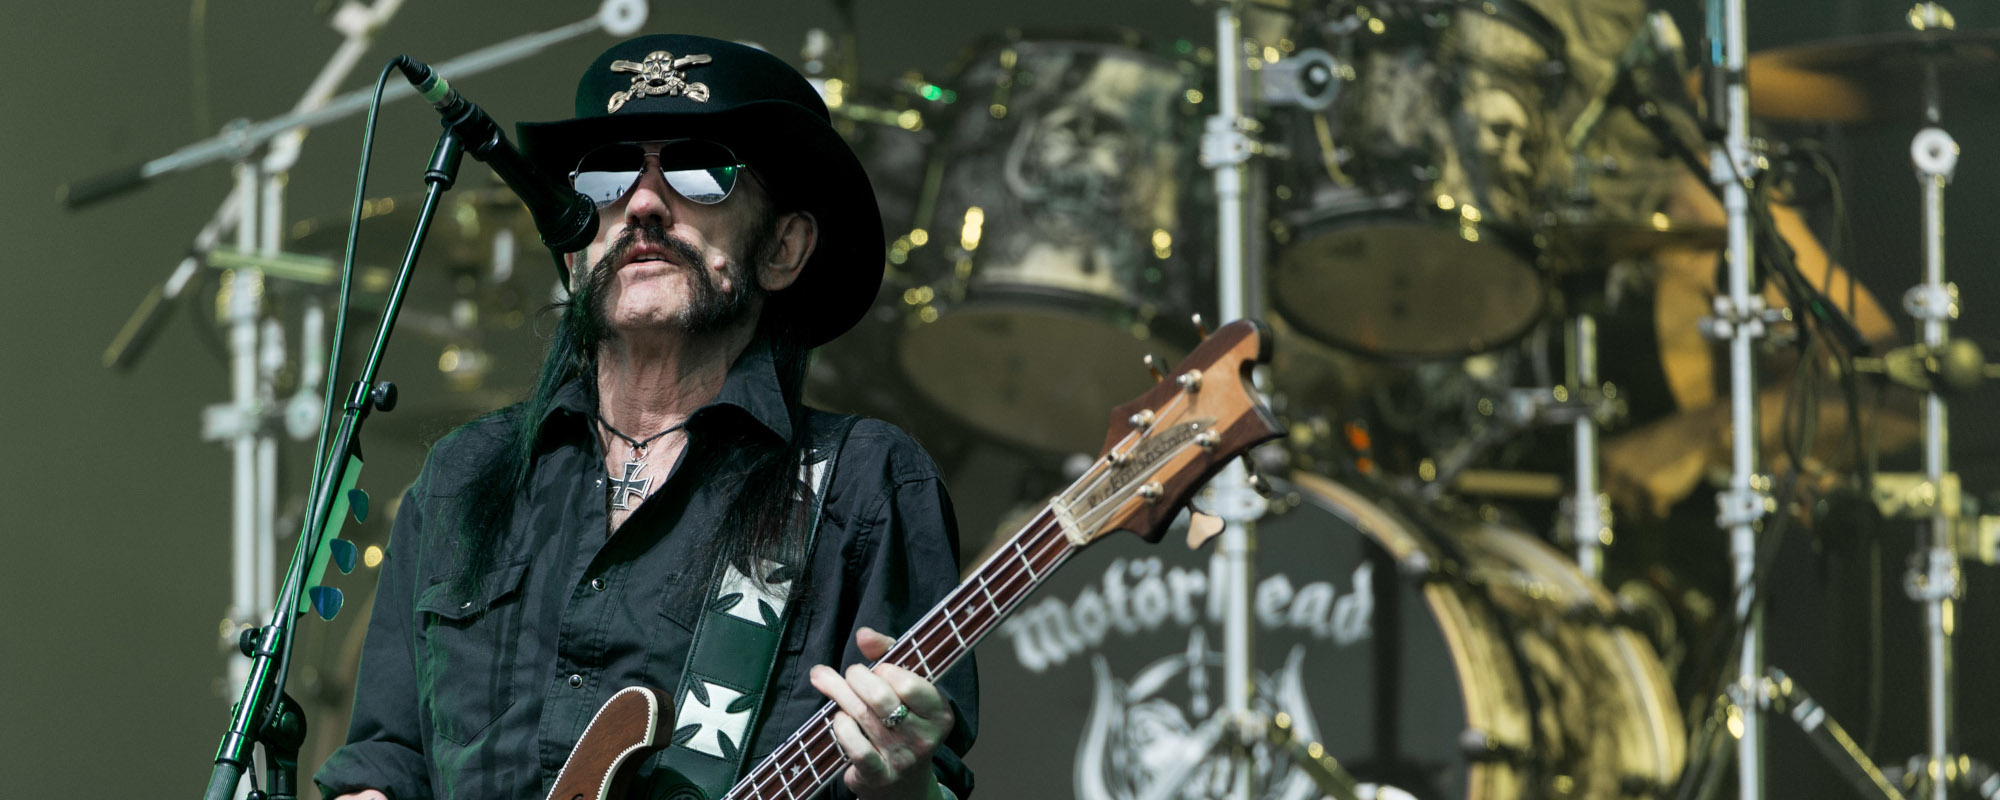 8 Motörhead Songs that Represent a Departure from Their Usual Sound